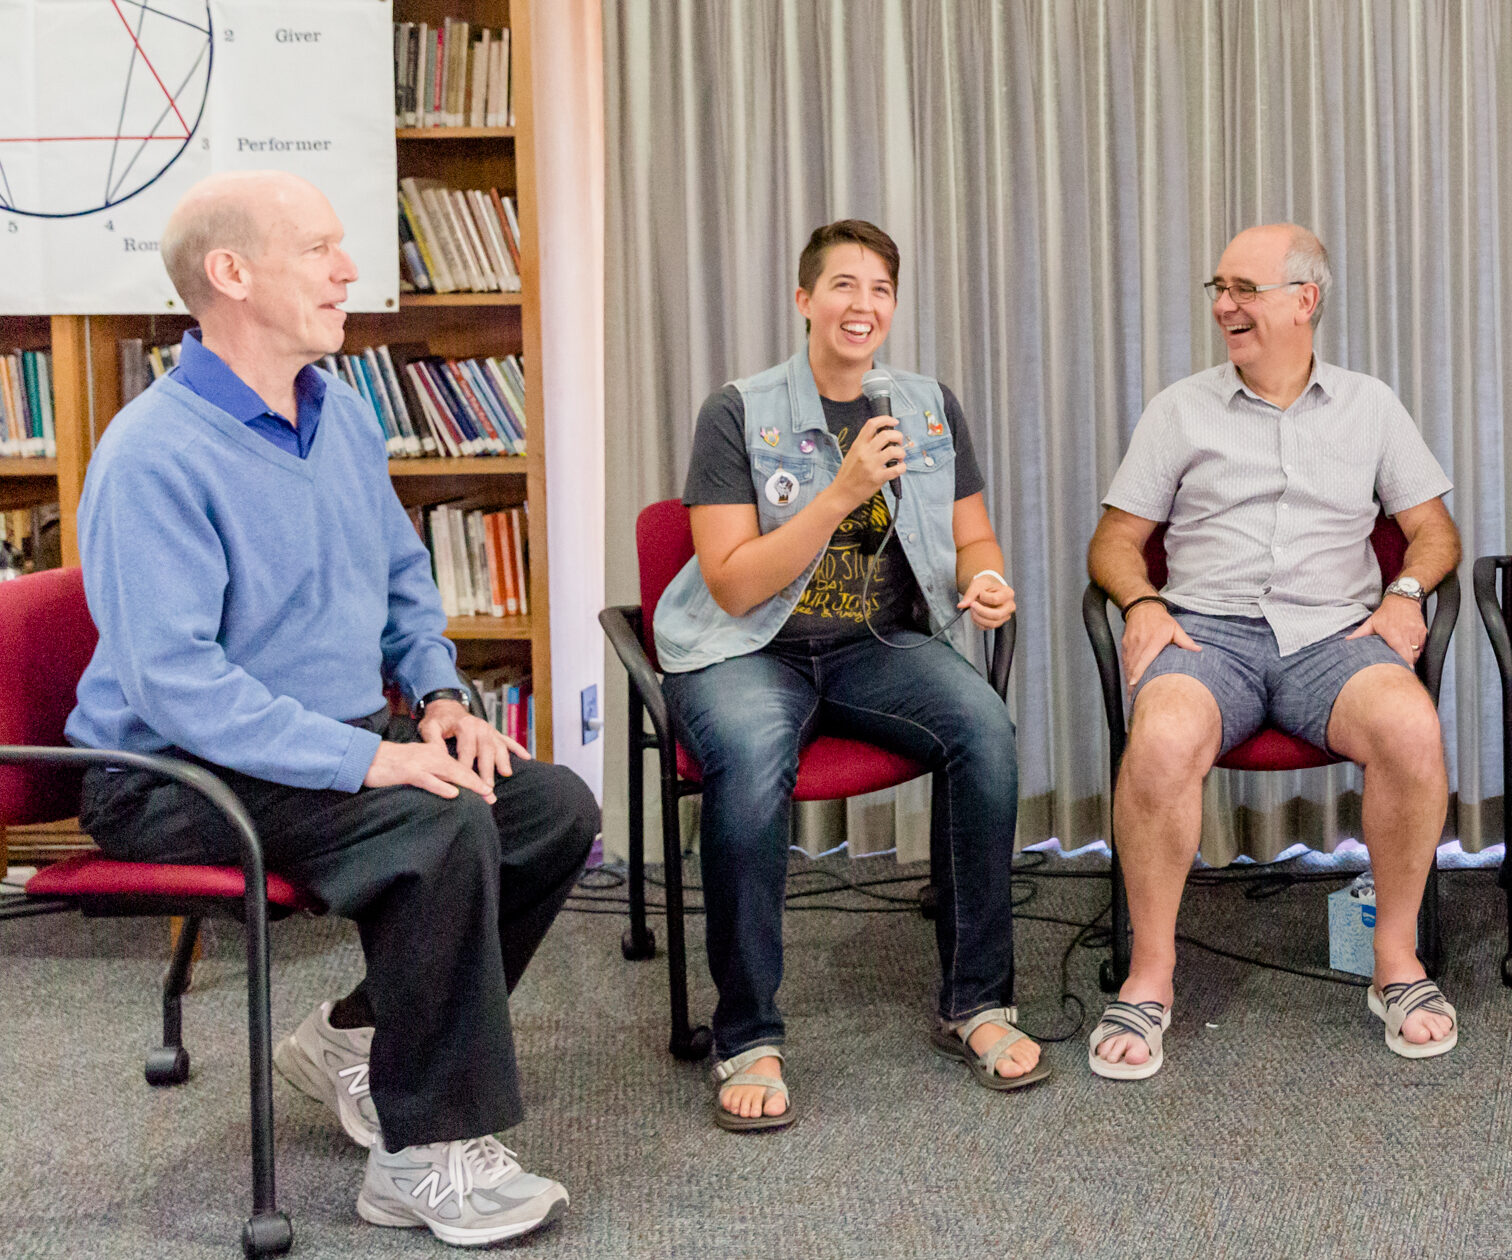 Panelists share their experiences at a Narrative Enneagram training